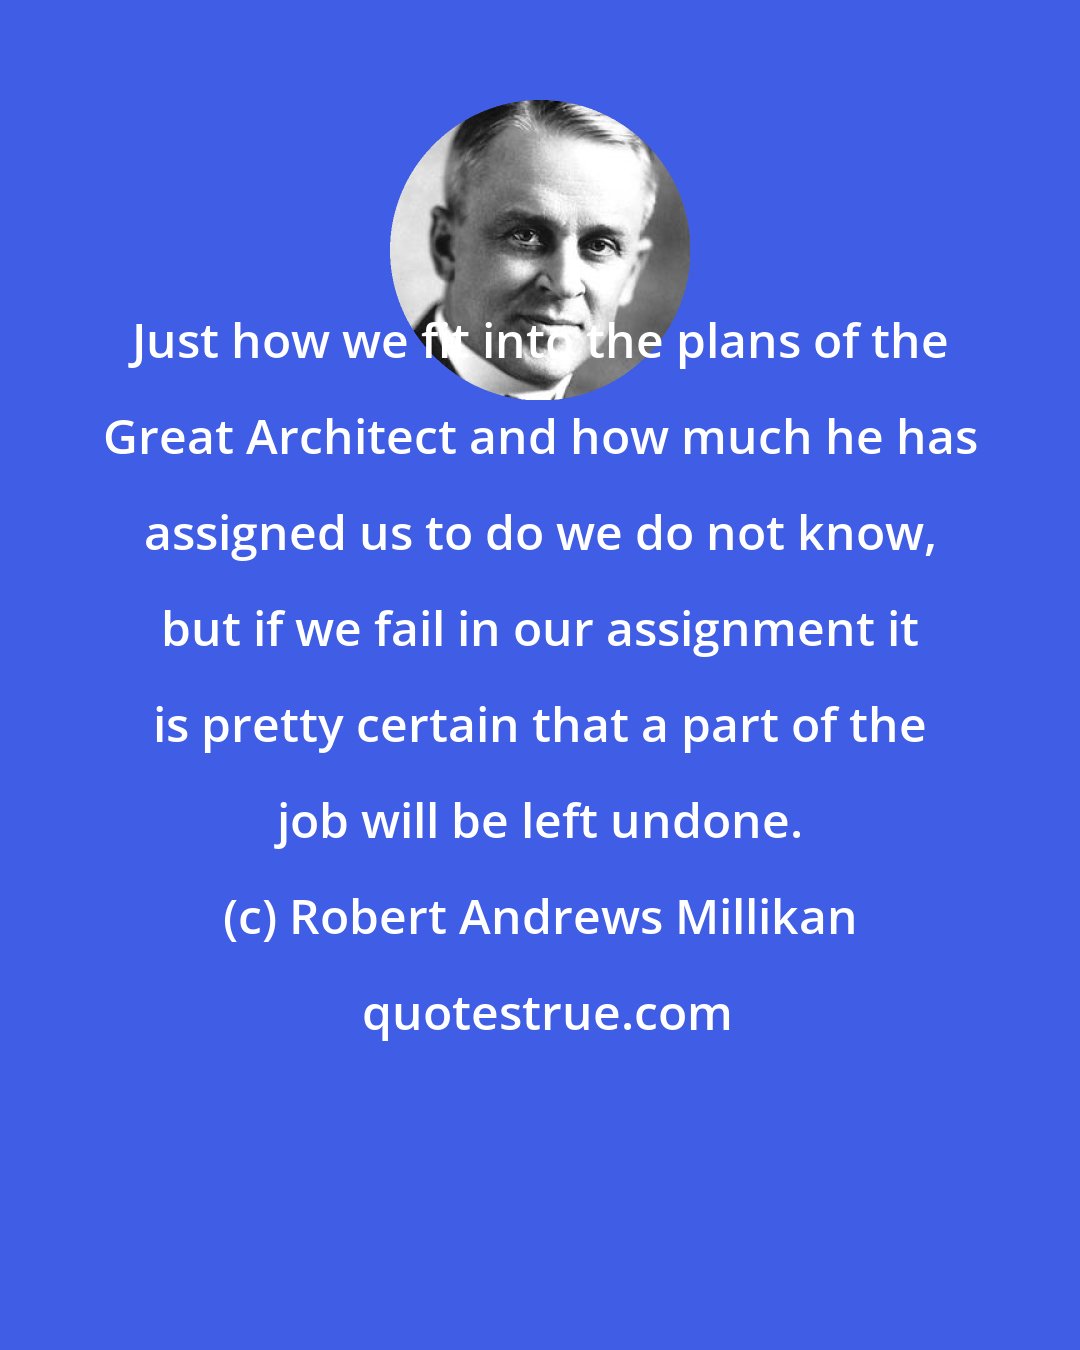 Robert Andrews Millikan: Just how we fit into the plans of the Great Architect and how much he has assigned us to do we do not know, but if we fail in our assignment it is pretty certain that a part of the job will be left undone.